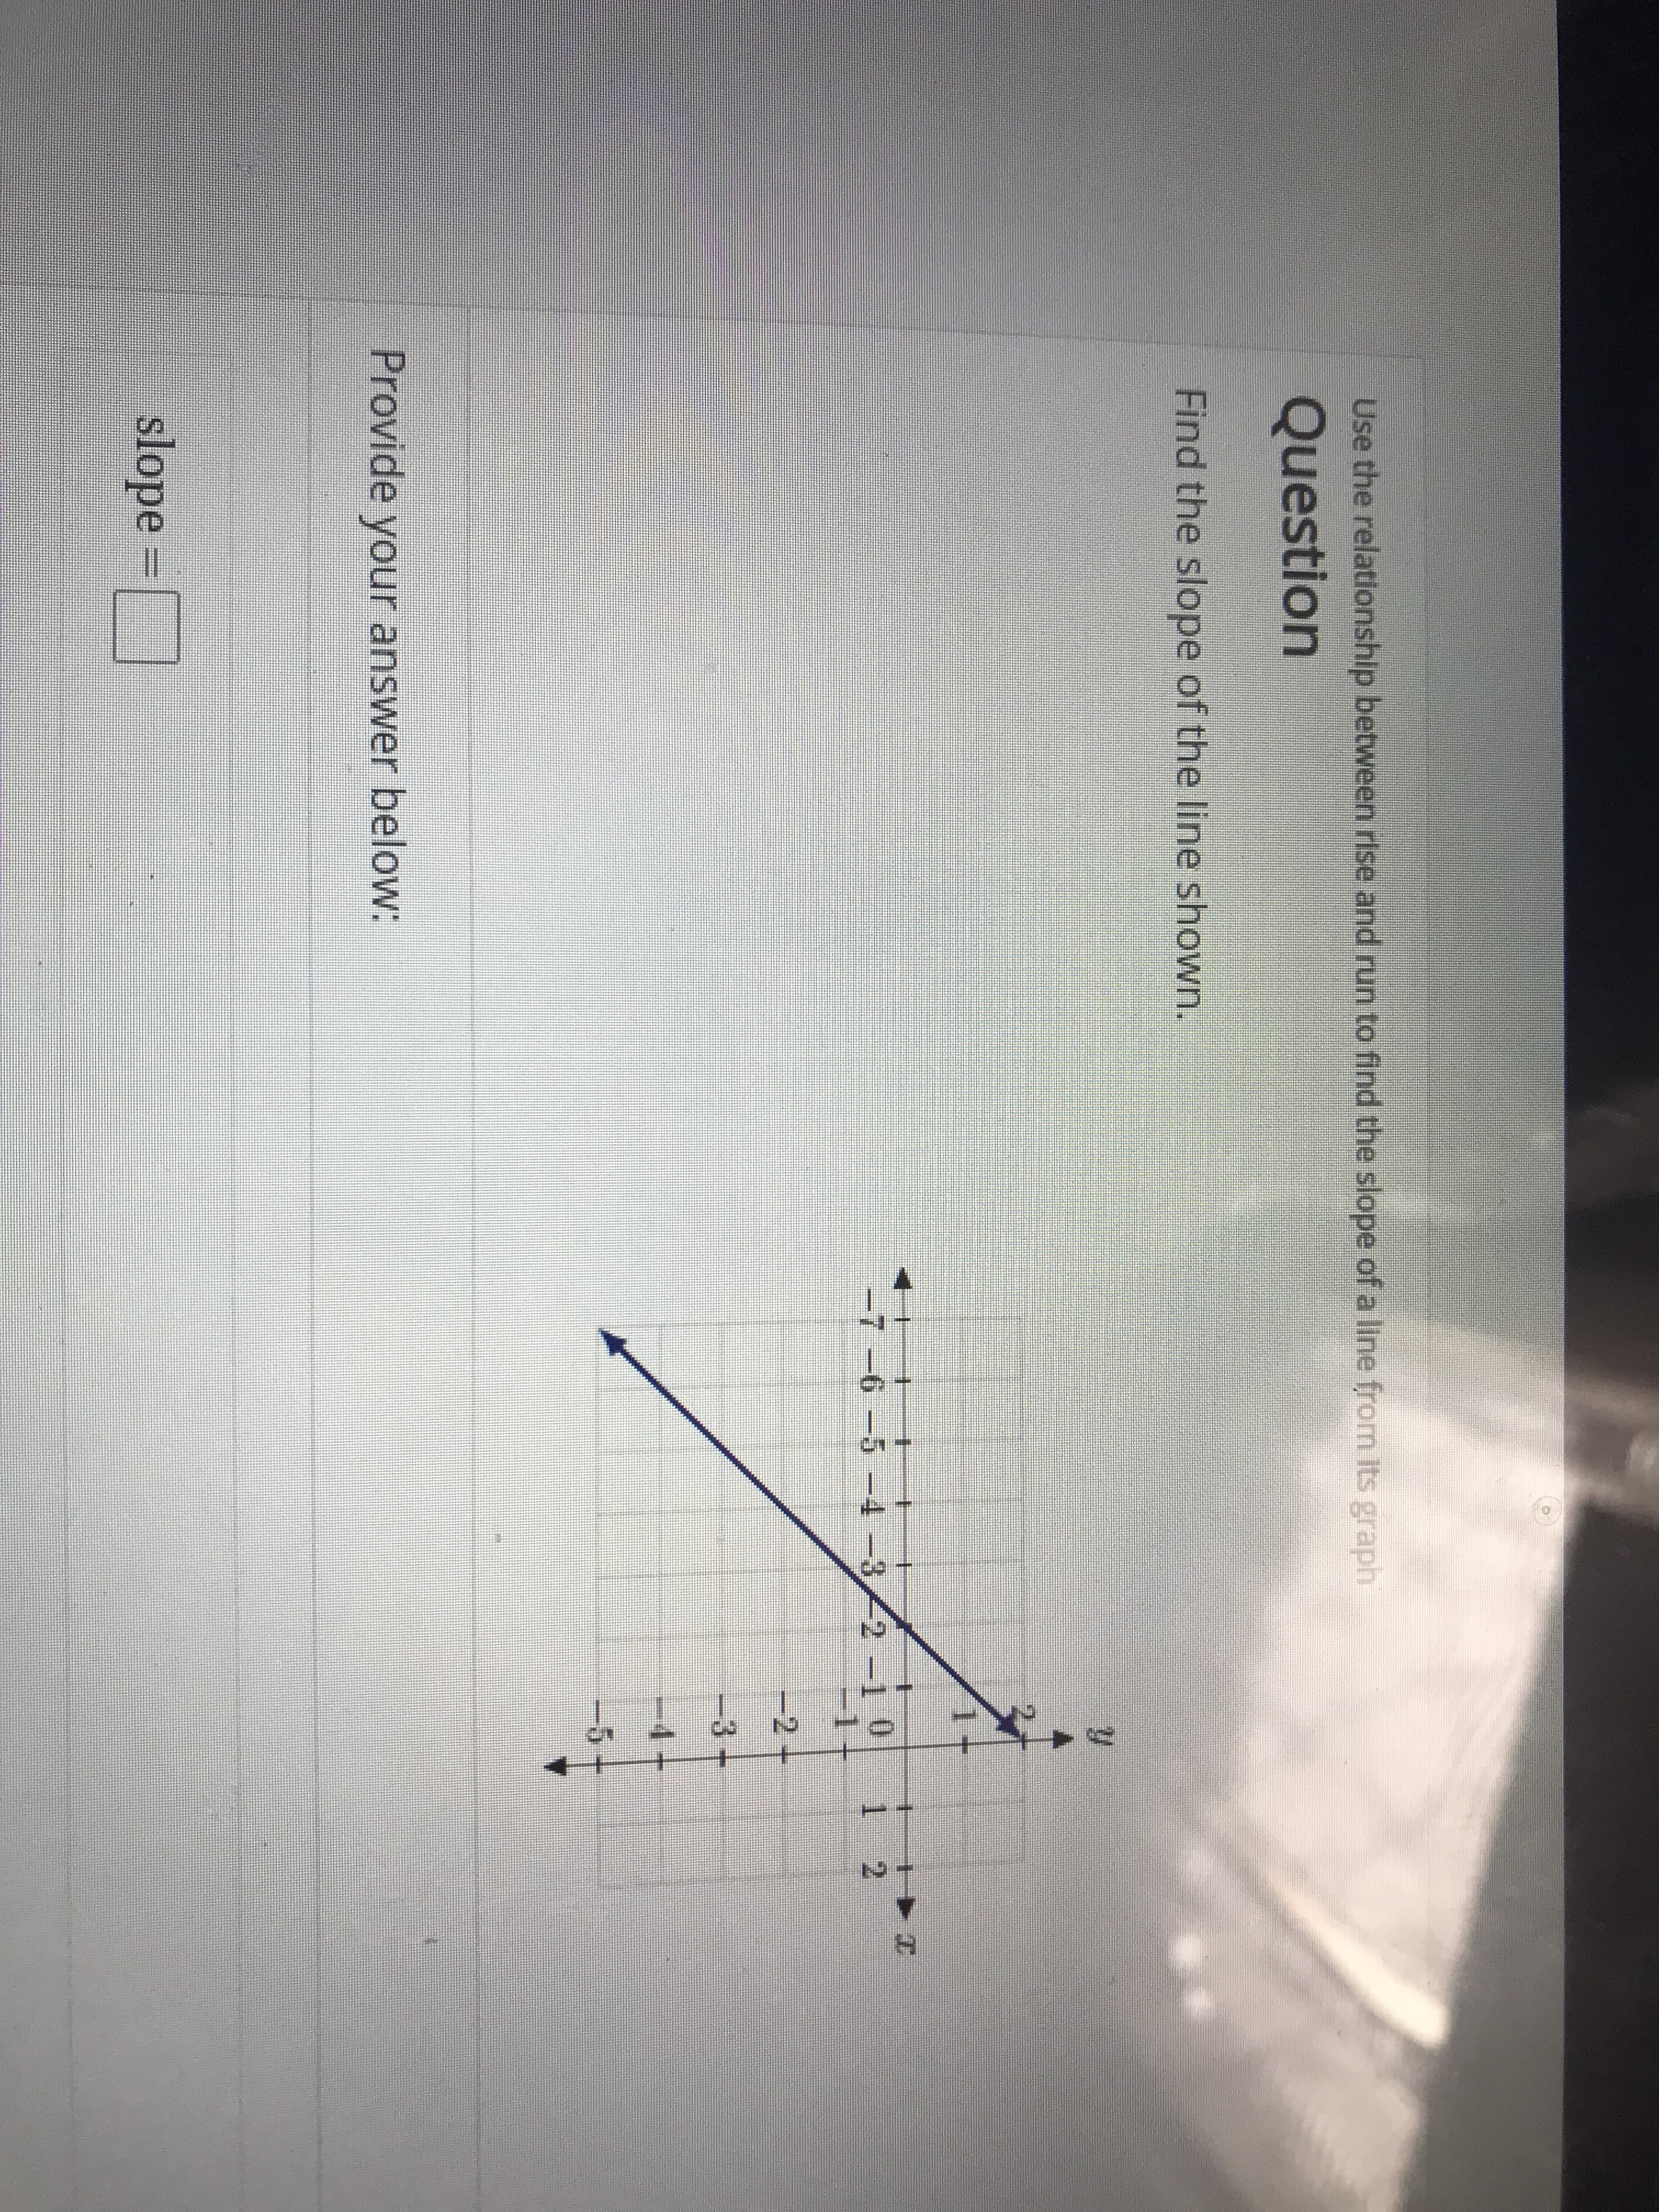 Use the relationship between rise and run to find the slope of a line from Its graph
Question
Find the slope of the line shown.
-7-6-5-4 -32-1 0
2
2
-
3
-5
Provide your answer below:
slope
